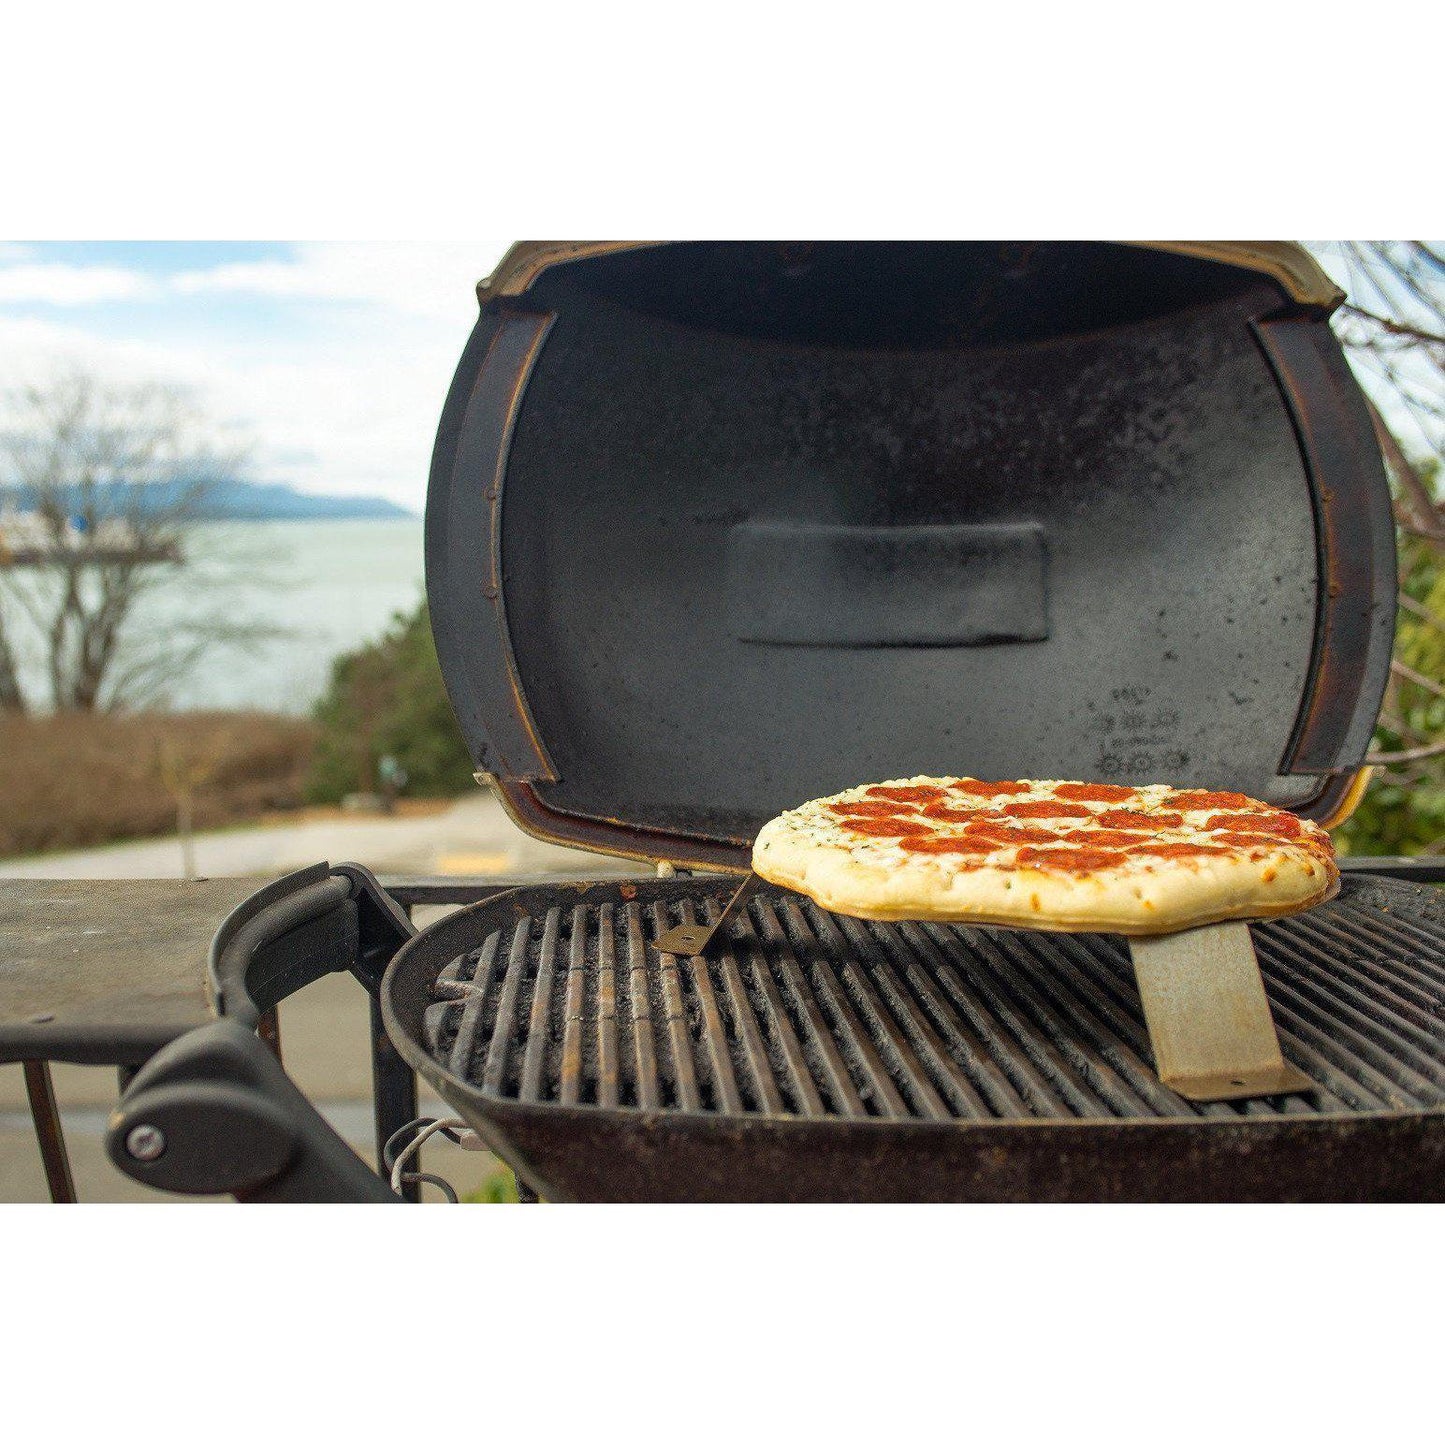 Grilled Pizza on the Barbecue